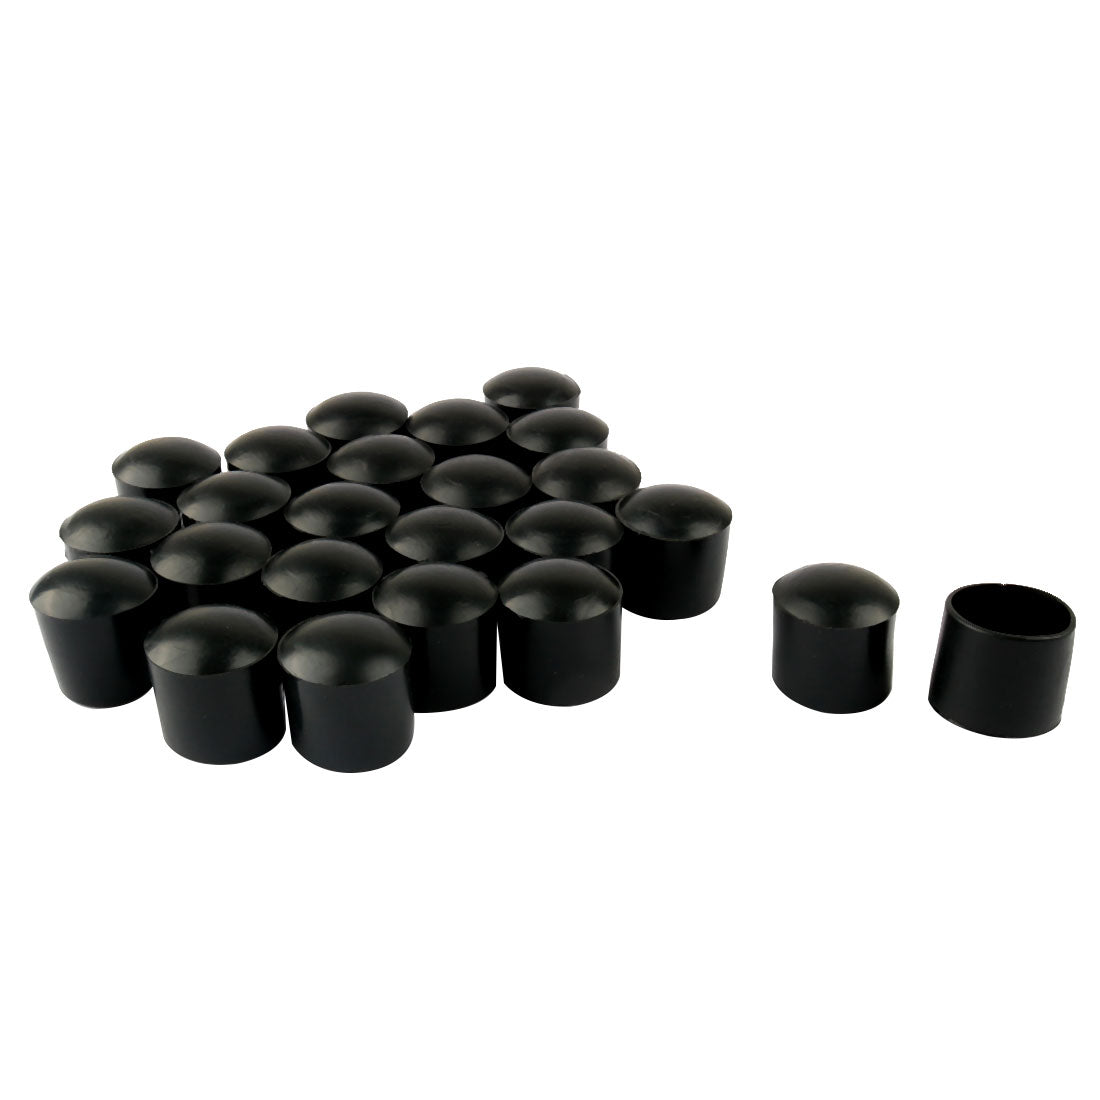 uxcell Uxcell PVC Leg Caps Tips Cup Feet Covers 24pcs Protector for Furniture Chair Cabinets